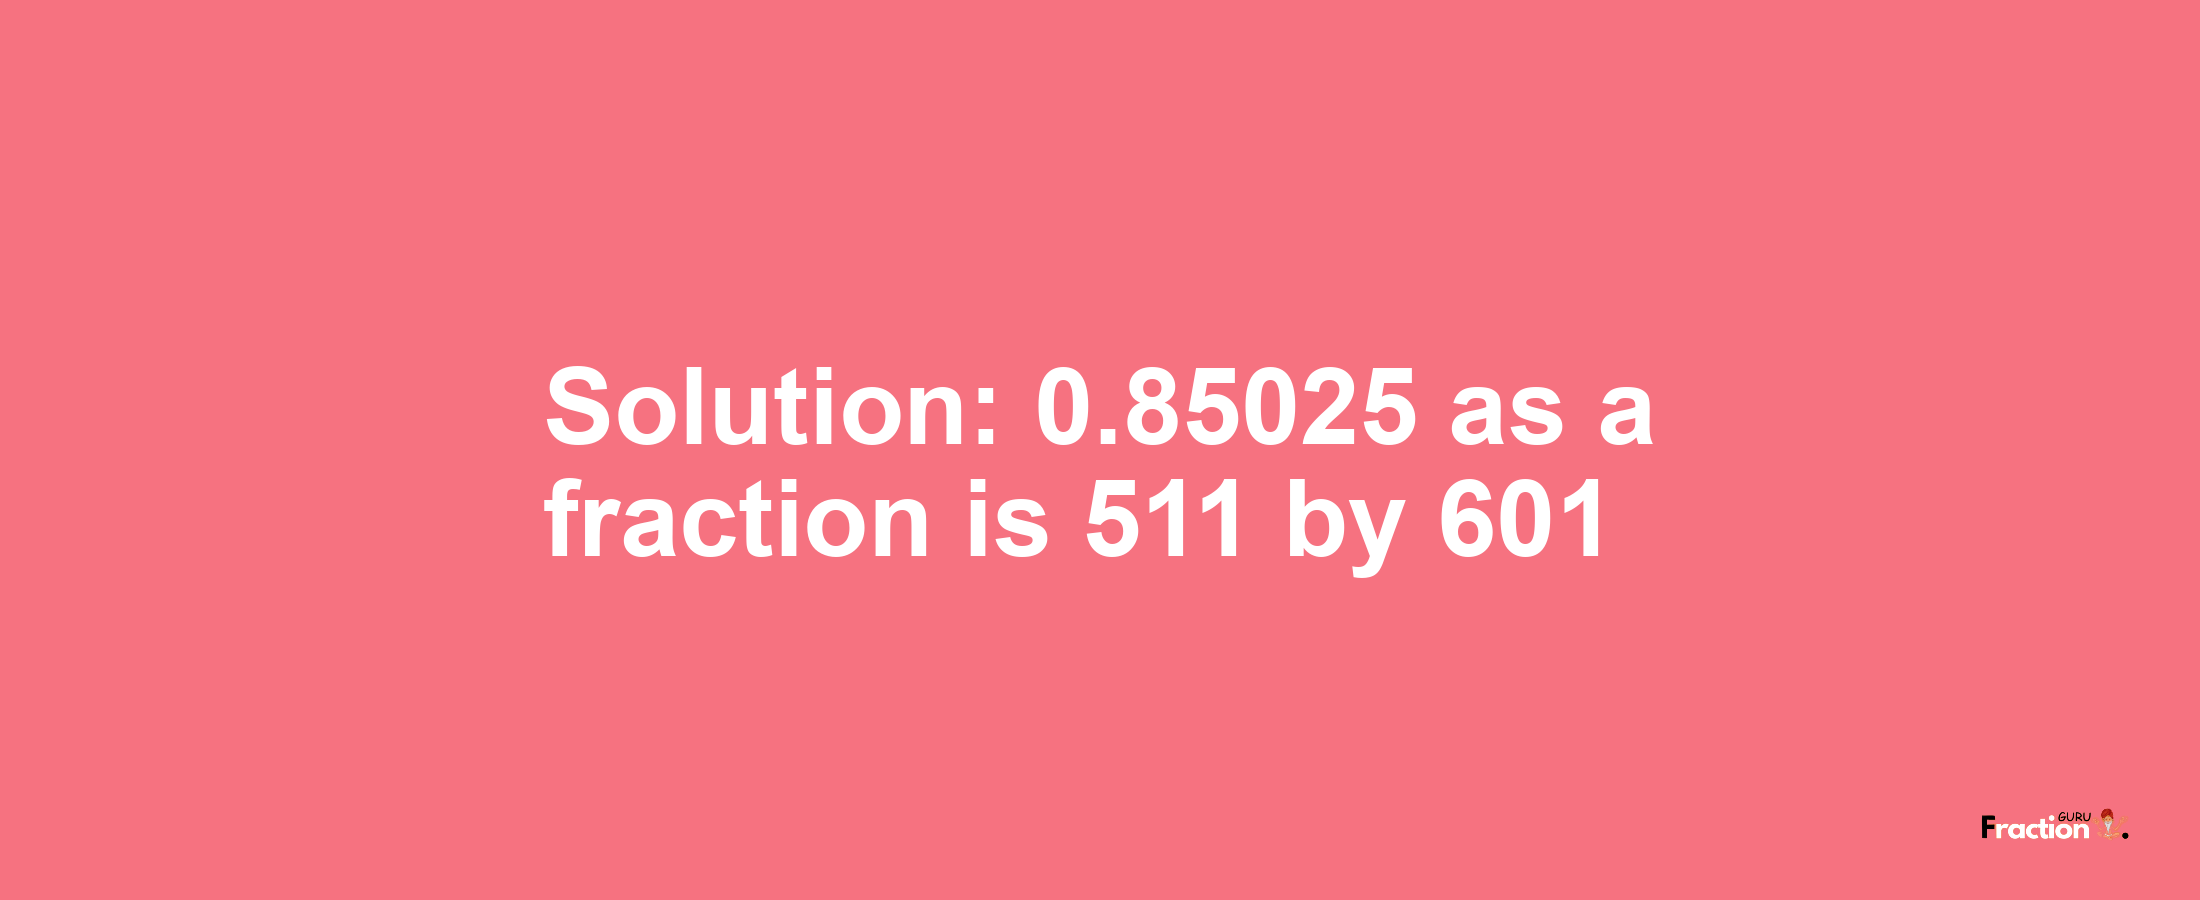 Solution:0.85025 as a fraction is 511/601